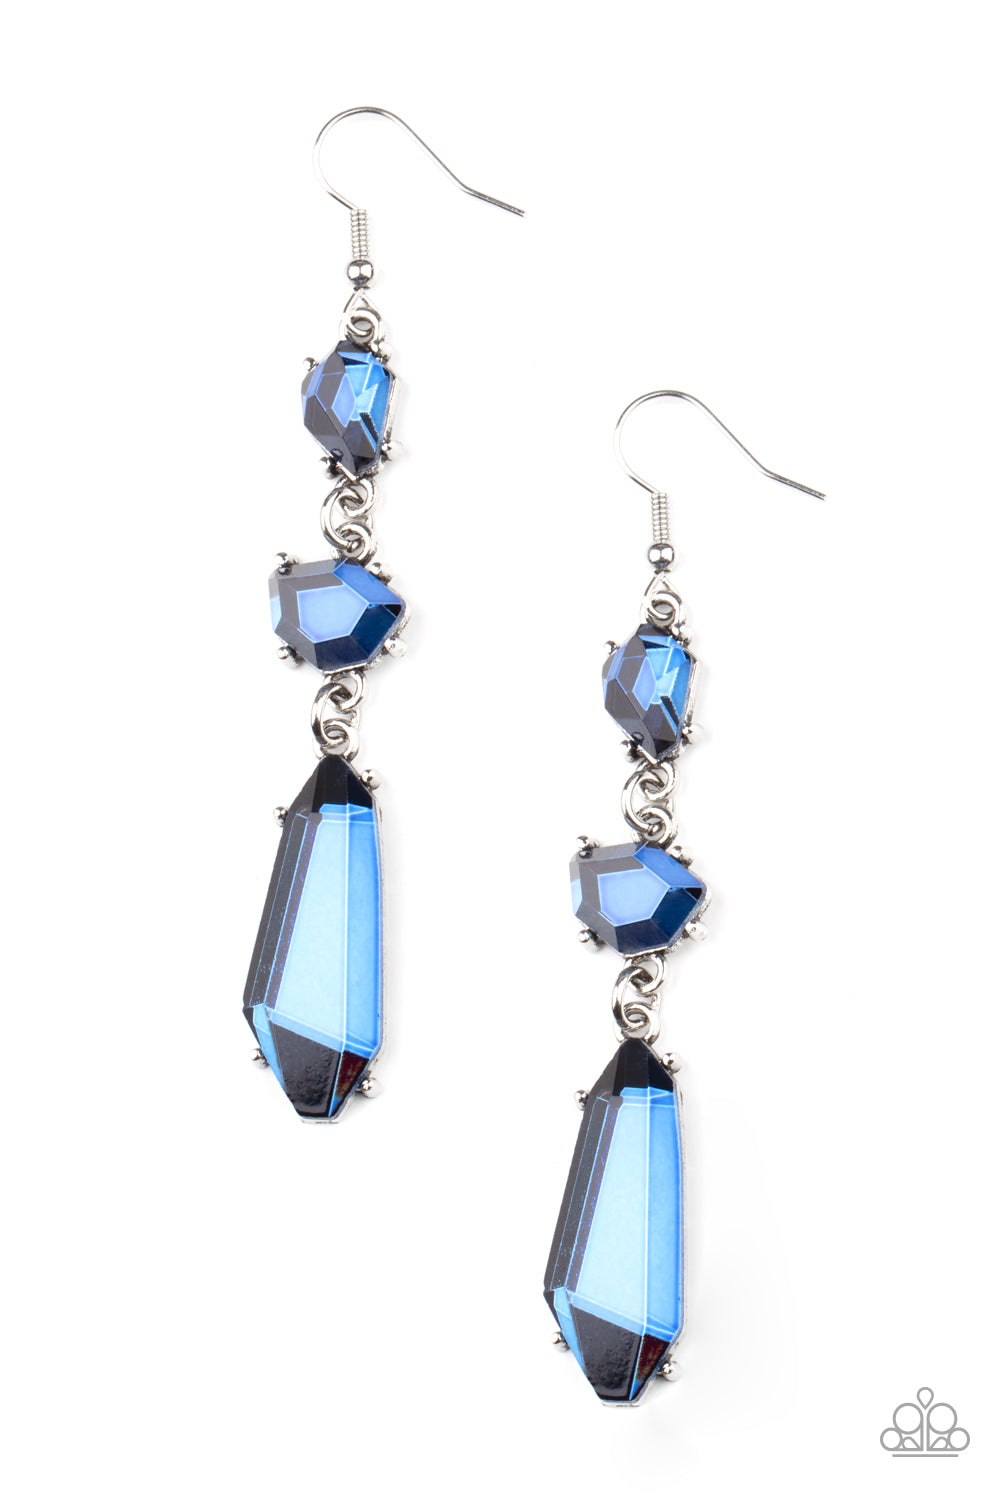 Sophisticated Smolder Blue Earring - Paparazzi Accessories  Featuring raw cuts, an asymmetrical collection of faceted blue gems trickles from the ear, creating a smoldering chandelier. Earring attaches to a standard fishhook fitting.  All Paparazzi Accessories are lead free and nickel free!  Sold as one pair of earrings.